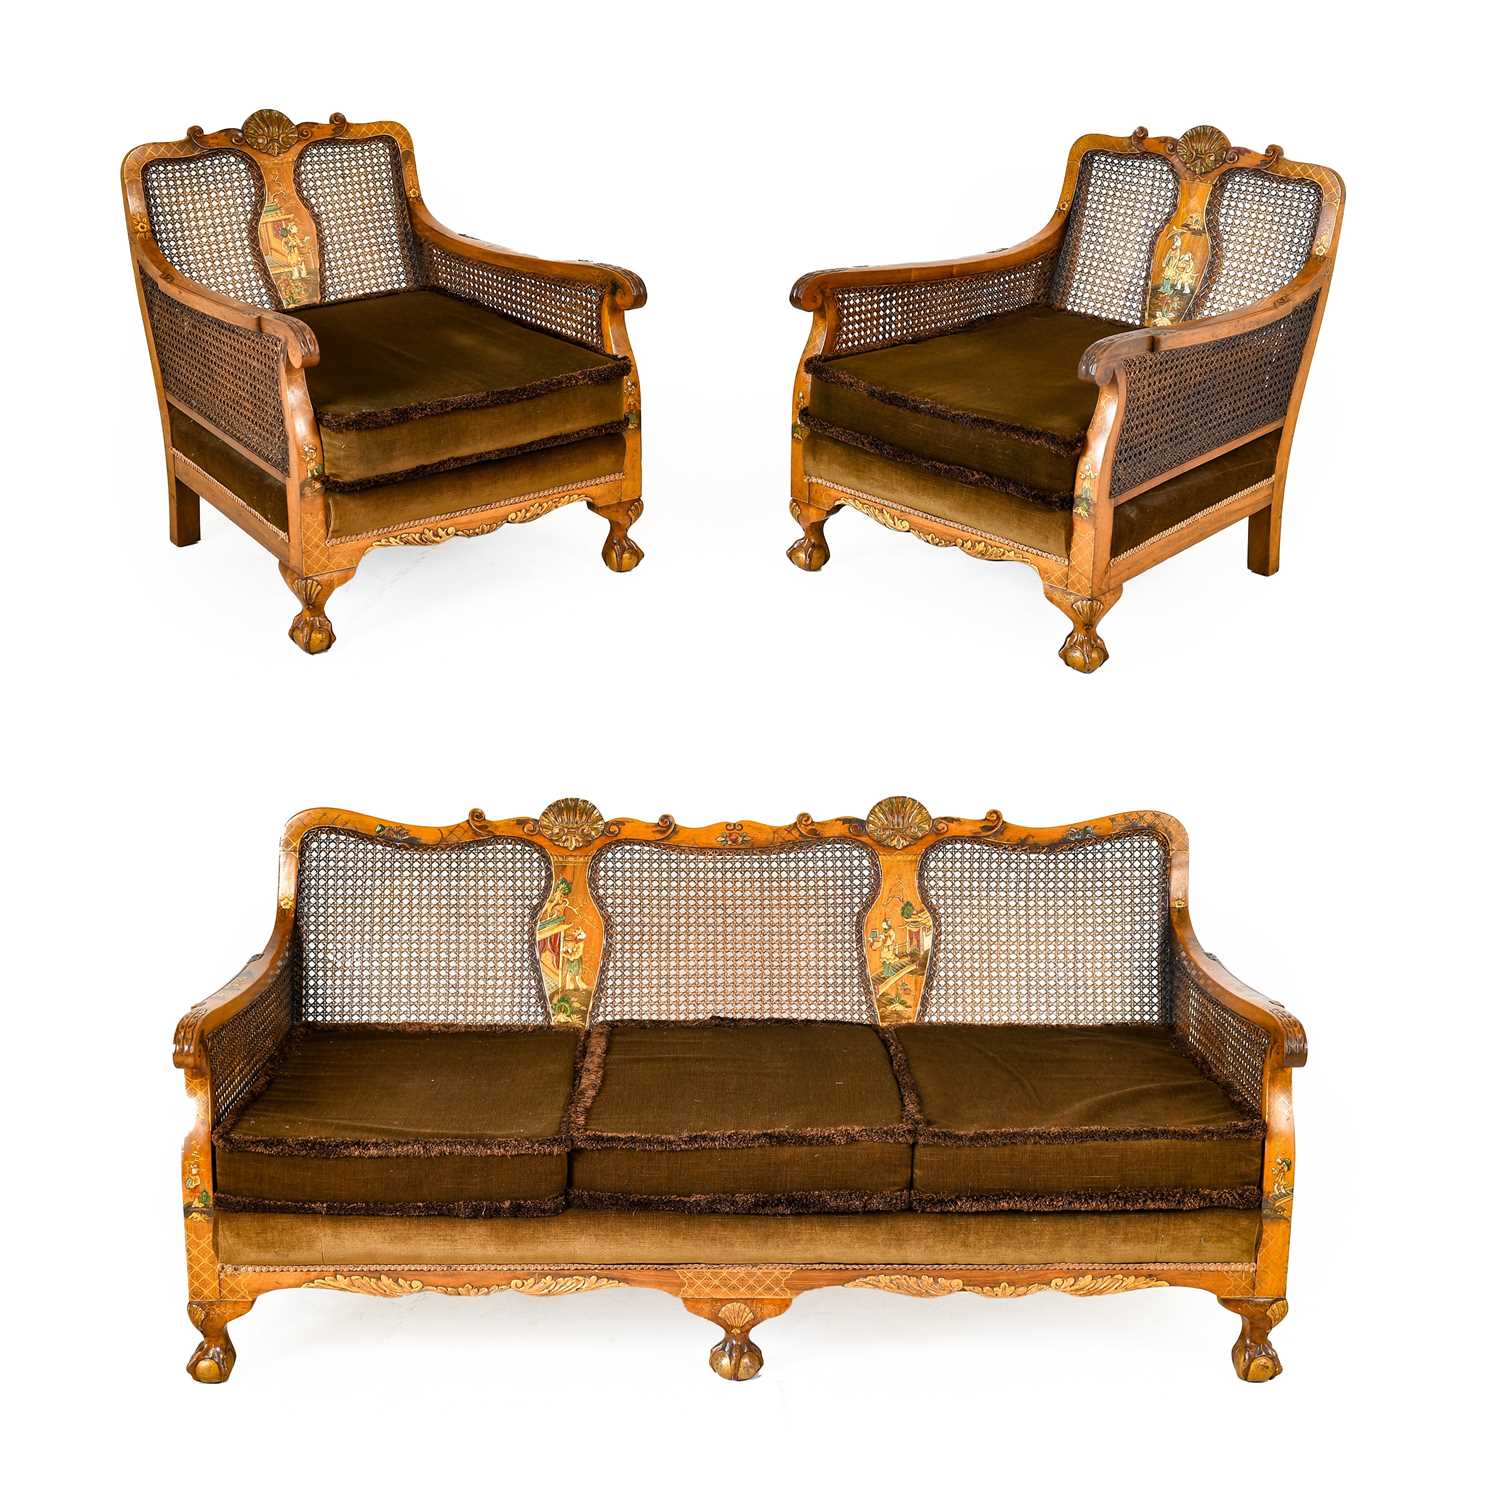 An Early 20th Century Walnut and Chinoiserie Decorated Double-Caned Three-Piece Bergere Suite,